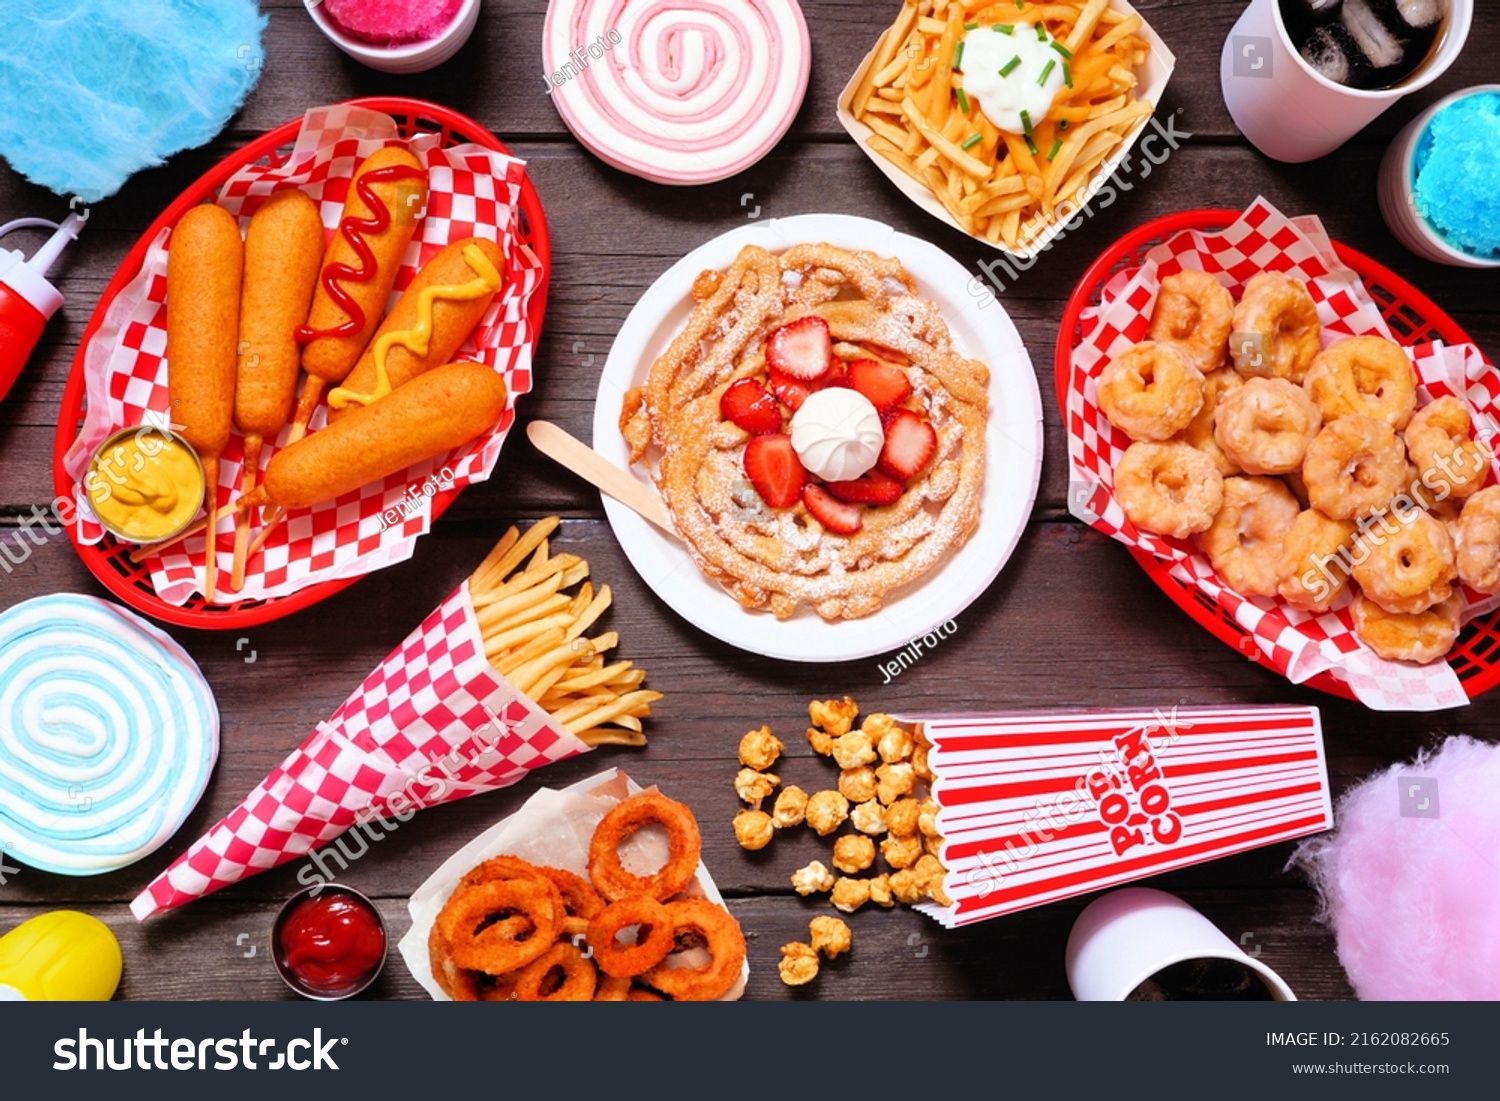 Carnival theme food double border over a dark wood background. Above view with copy space. Summer fair concept. Corn dogs, funnel cake, cotton candy and snacks. #2162082665